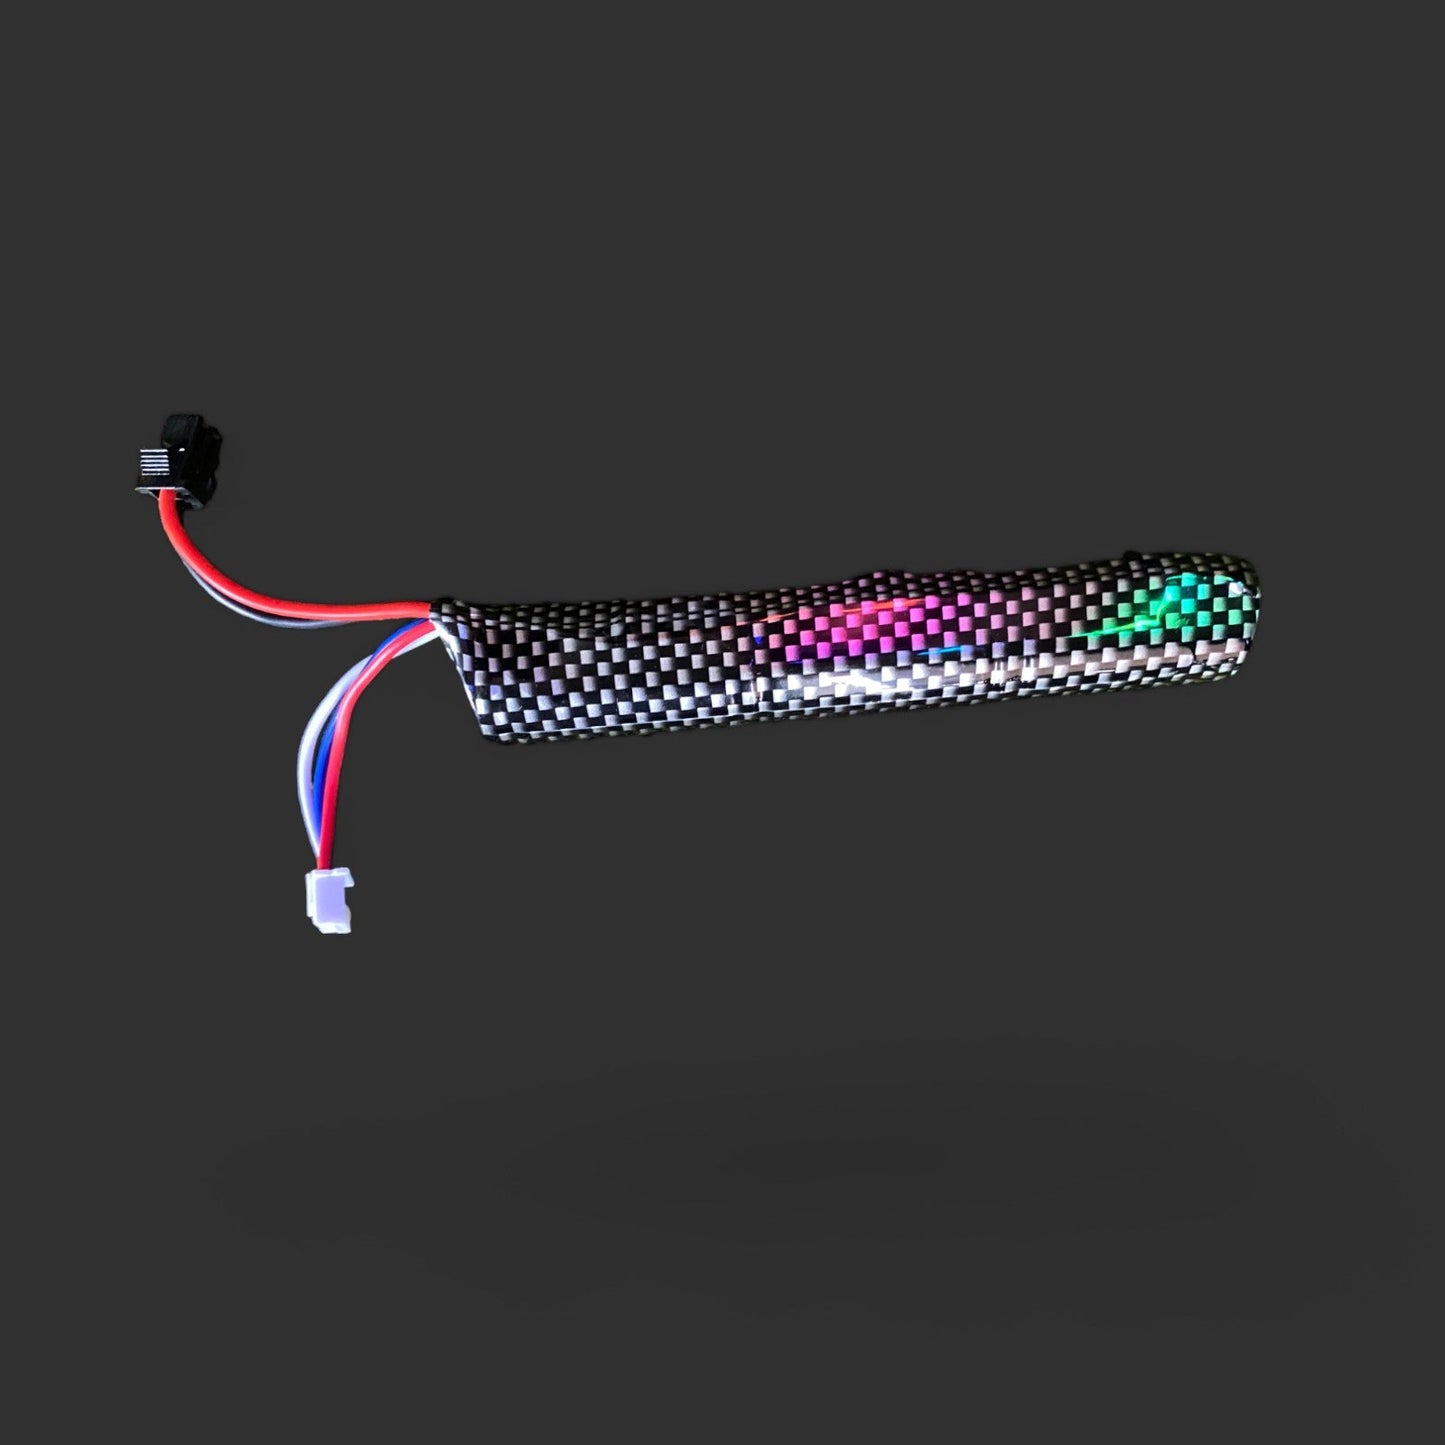 LED strip in a carbon fiber tube with multicolored lights and attached wiring, powered by a BlasterMaster 11.1V 18350 2000mAh SM2 30C long skin battery, isolated on a gray background.